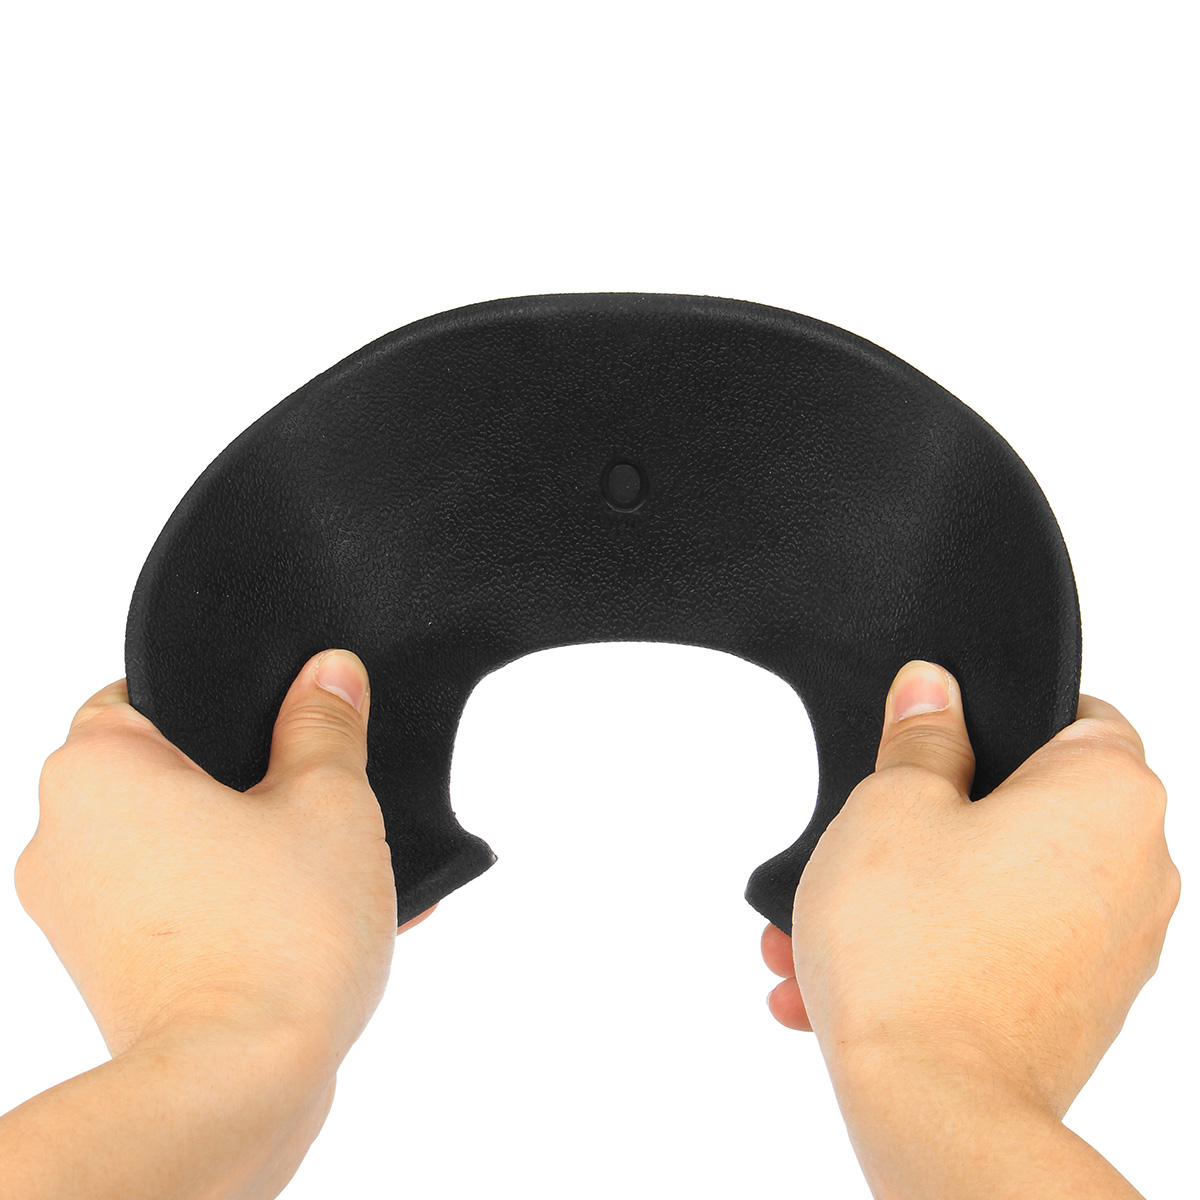 TPE-Weightlifting-Squat-Pad-Neck-Shoulder-Support-Sports-Barbell-Gym-Protector-1213093-9